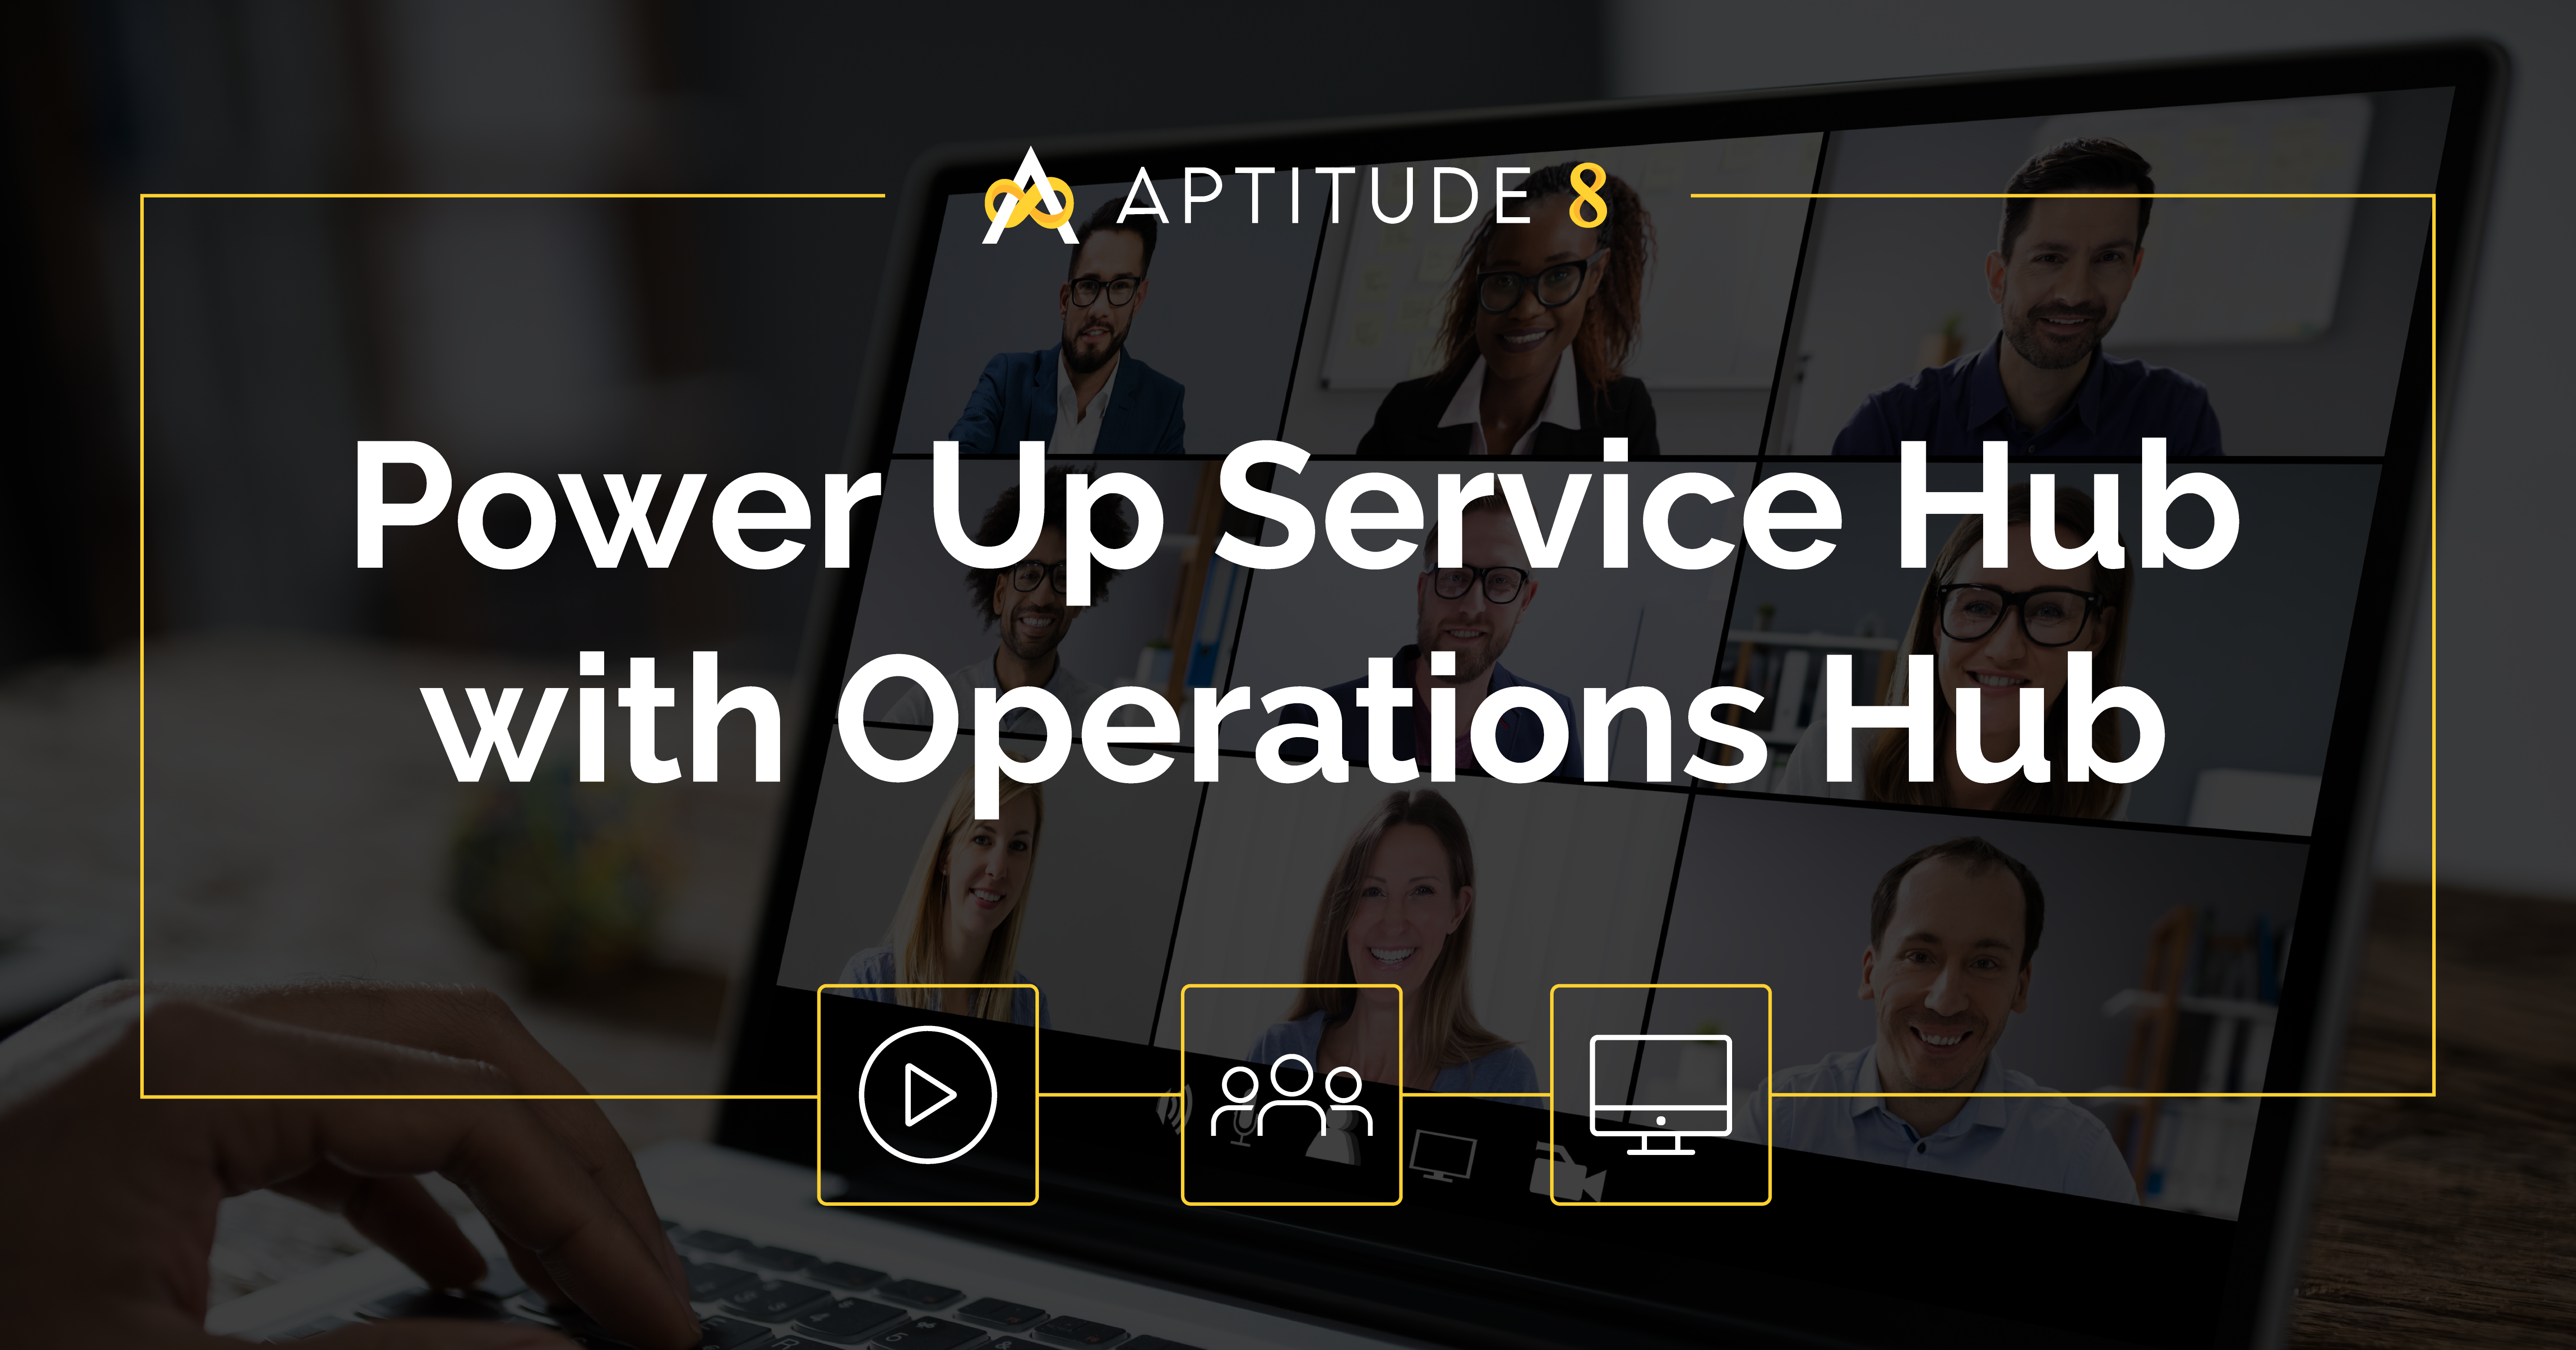 On Demand: Power Up Service Hub with Operations Hub